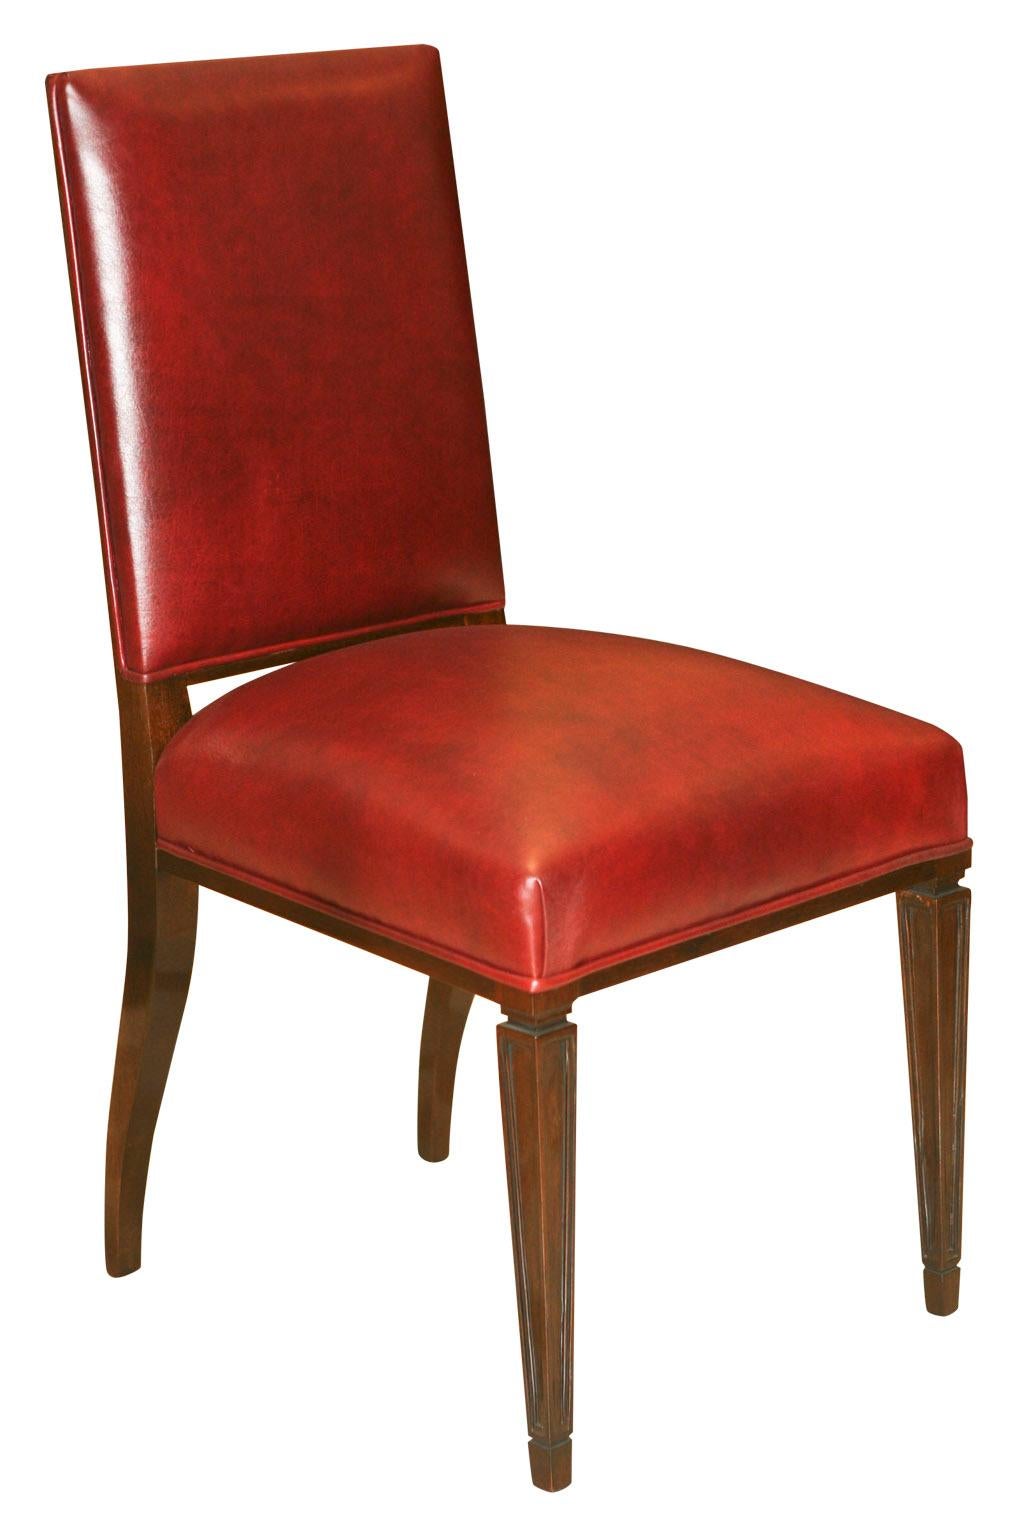 Luxury 12 Art Deco chairs in leather and wood.

Year 1930
Country: French
Materials : Wood and leather
Finish: polyurethanic lacquer
Elegant and sophisticated 12 chairs.
You want to live in the golden years, these are the chairs your project